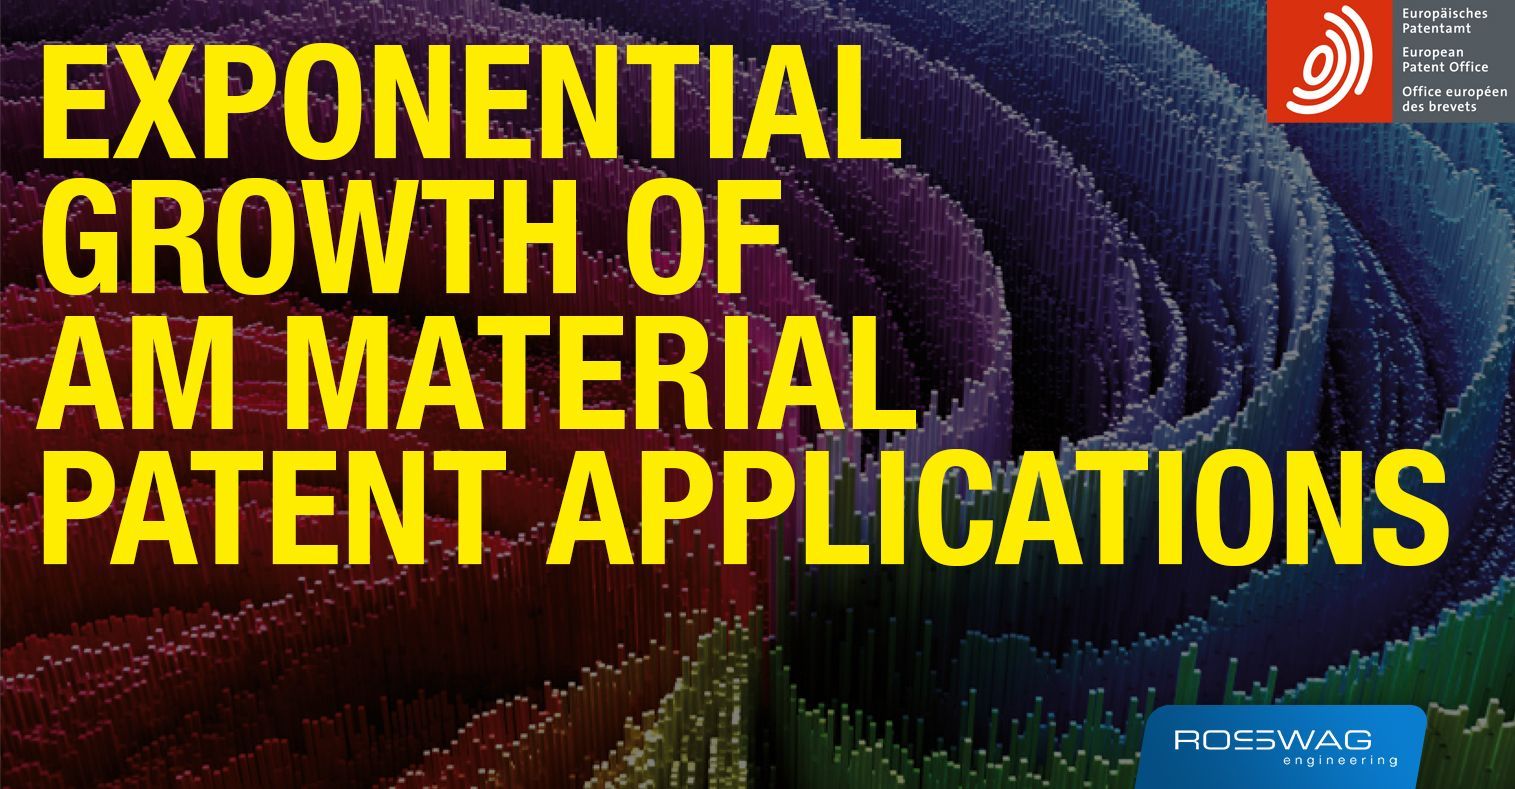 Rosswag Engineering - Exponential growth of am material patent applications